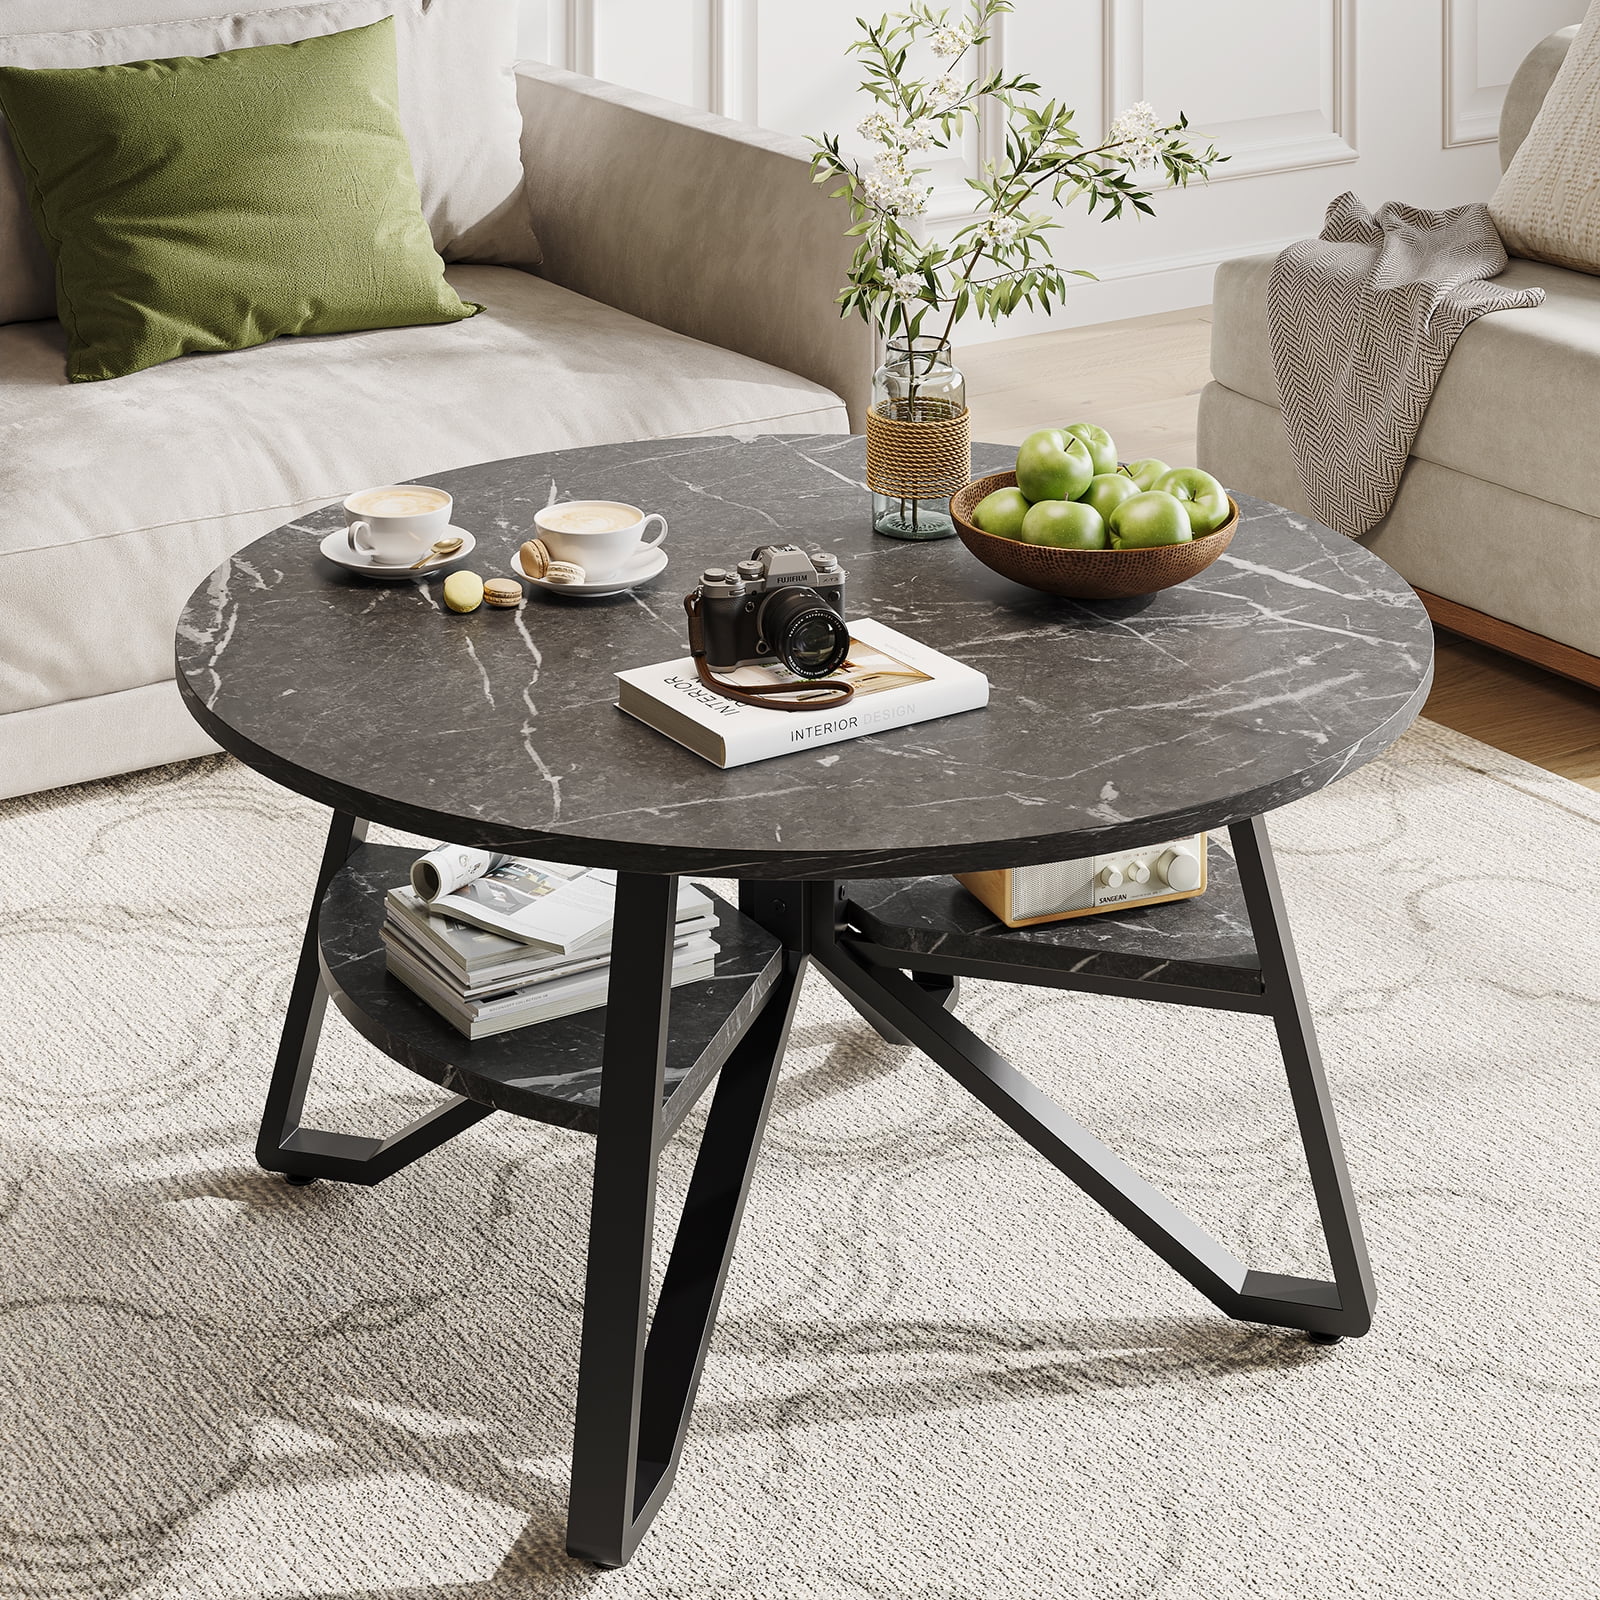 Bestier Round Coffee Table With Storage